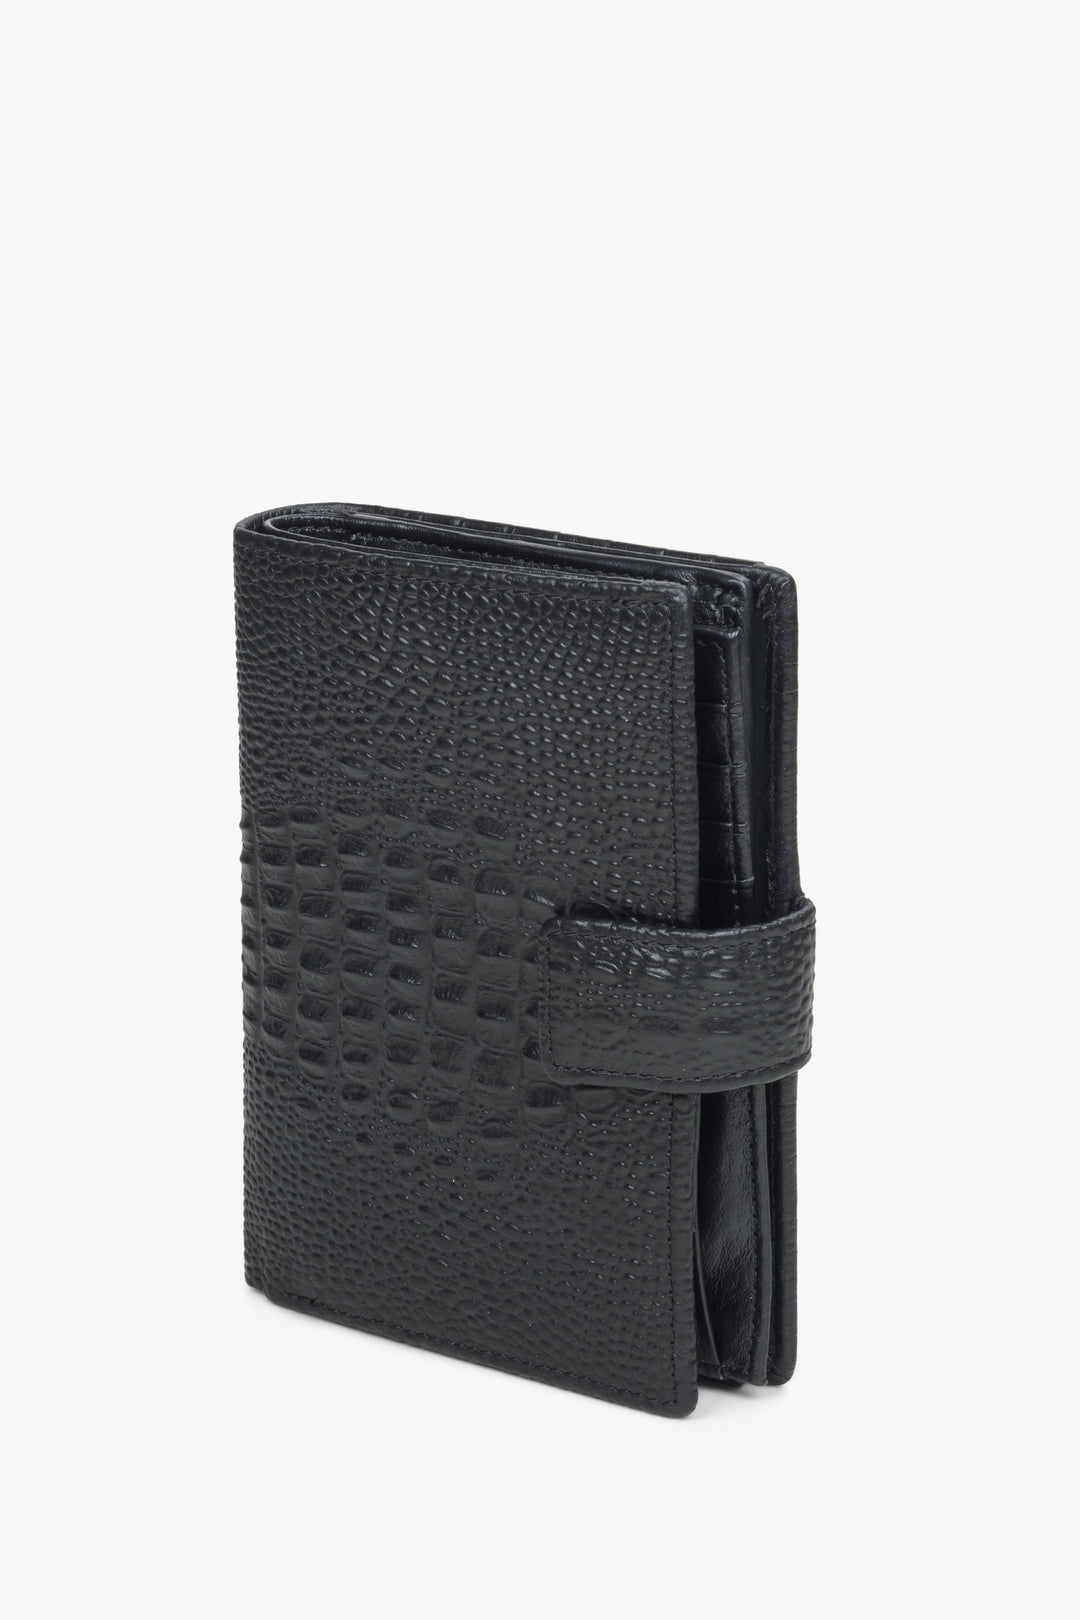 Men's black functional wallet made of genuine leather by Estro.